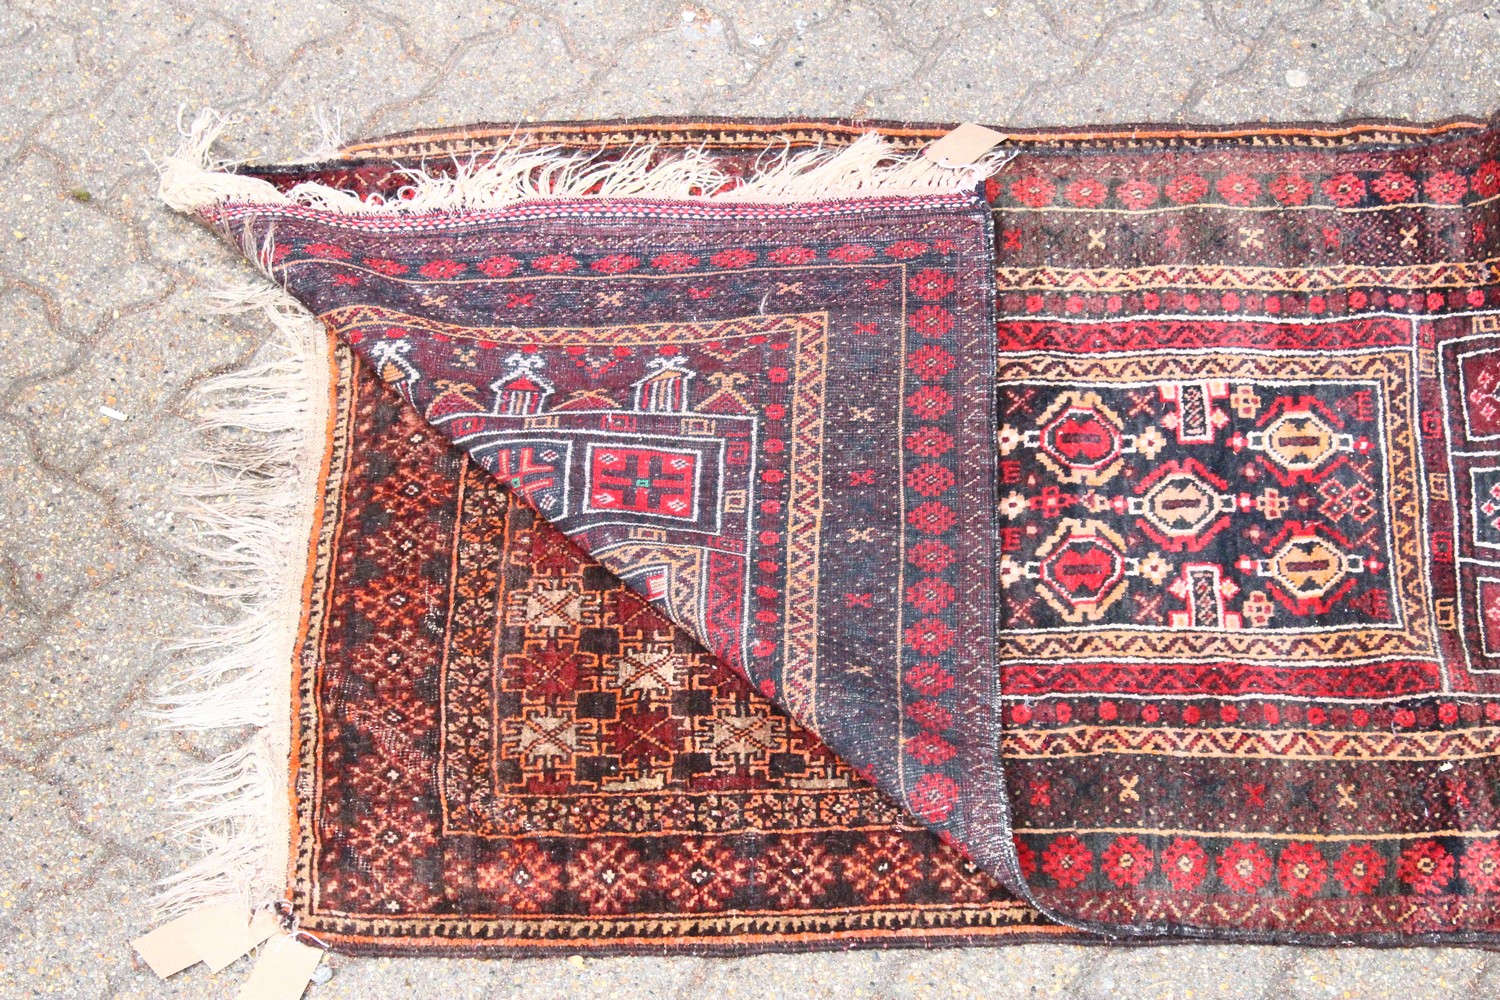 A SMALL 20TH CENTURY PERSIAN PRAYER RUG, black ground with stylised motifs. 5ft 0ins x 2ft 9ins. - Image 2 of 2